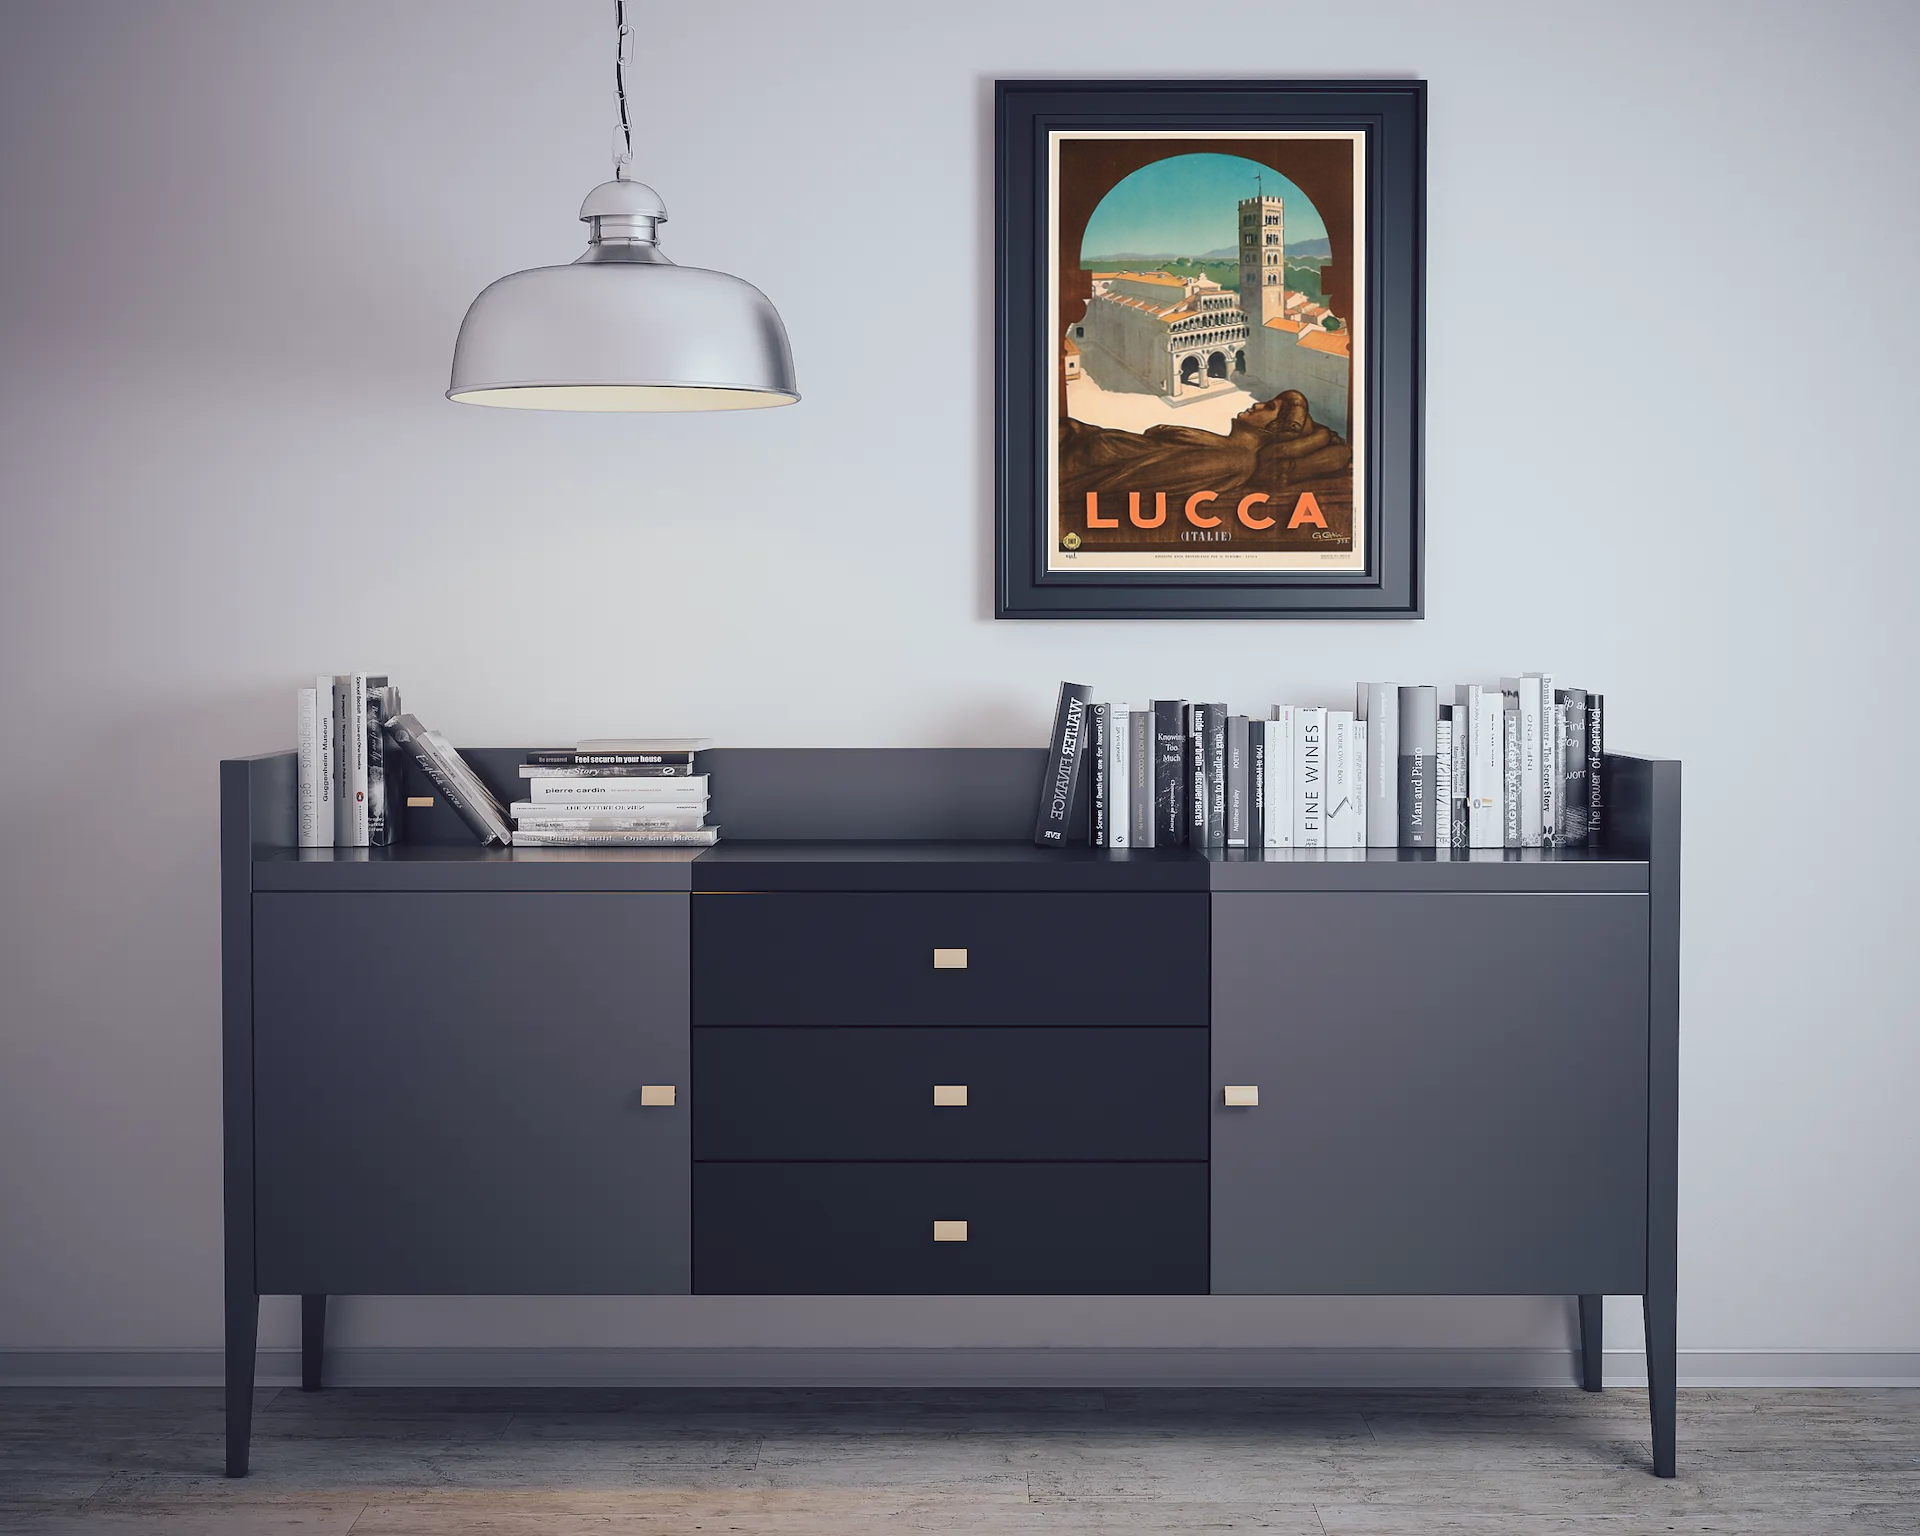 Vintage Lucca Travel Art Painting